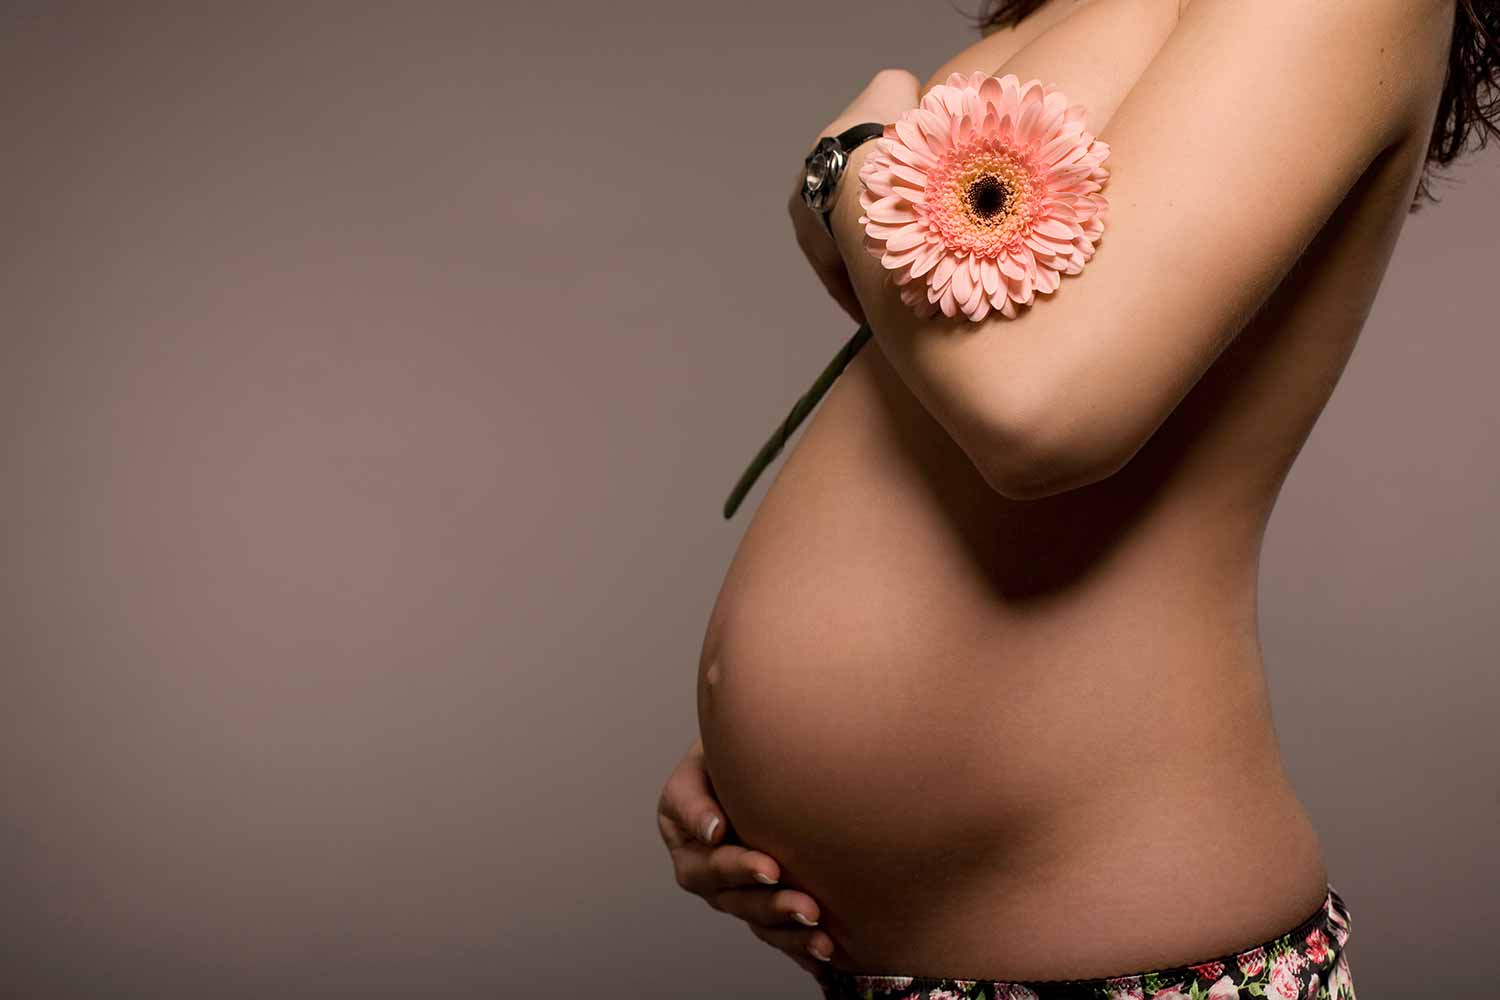 semi clothed pregnant woman holding a flower